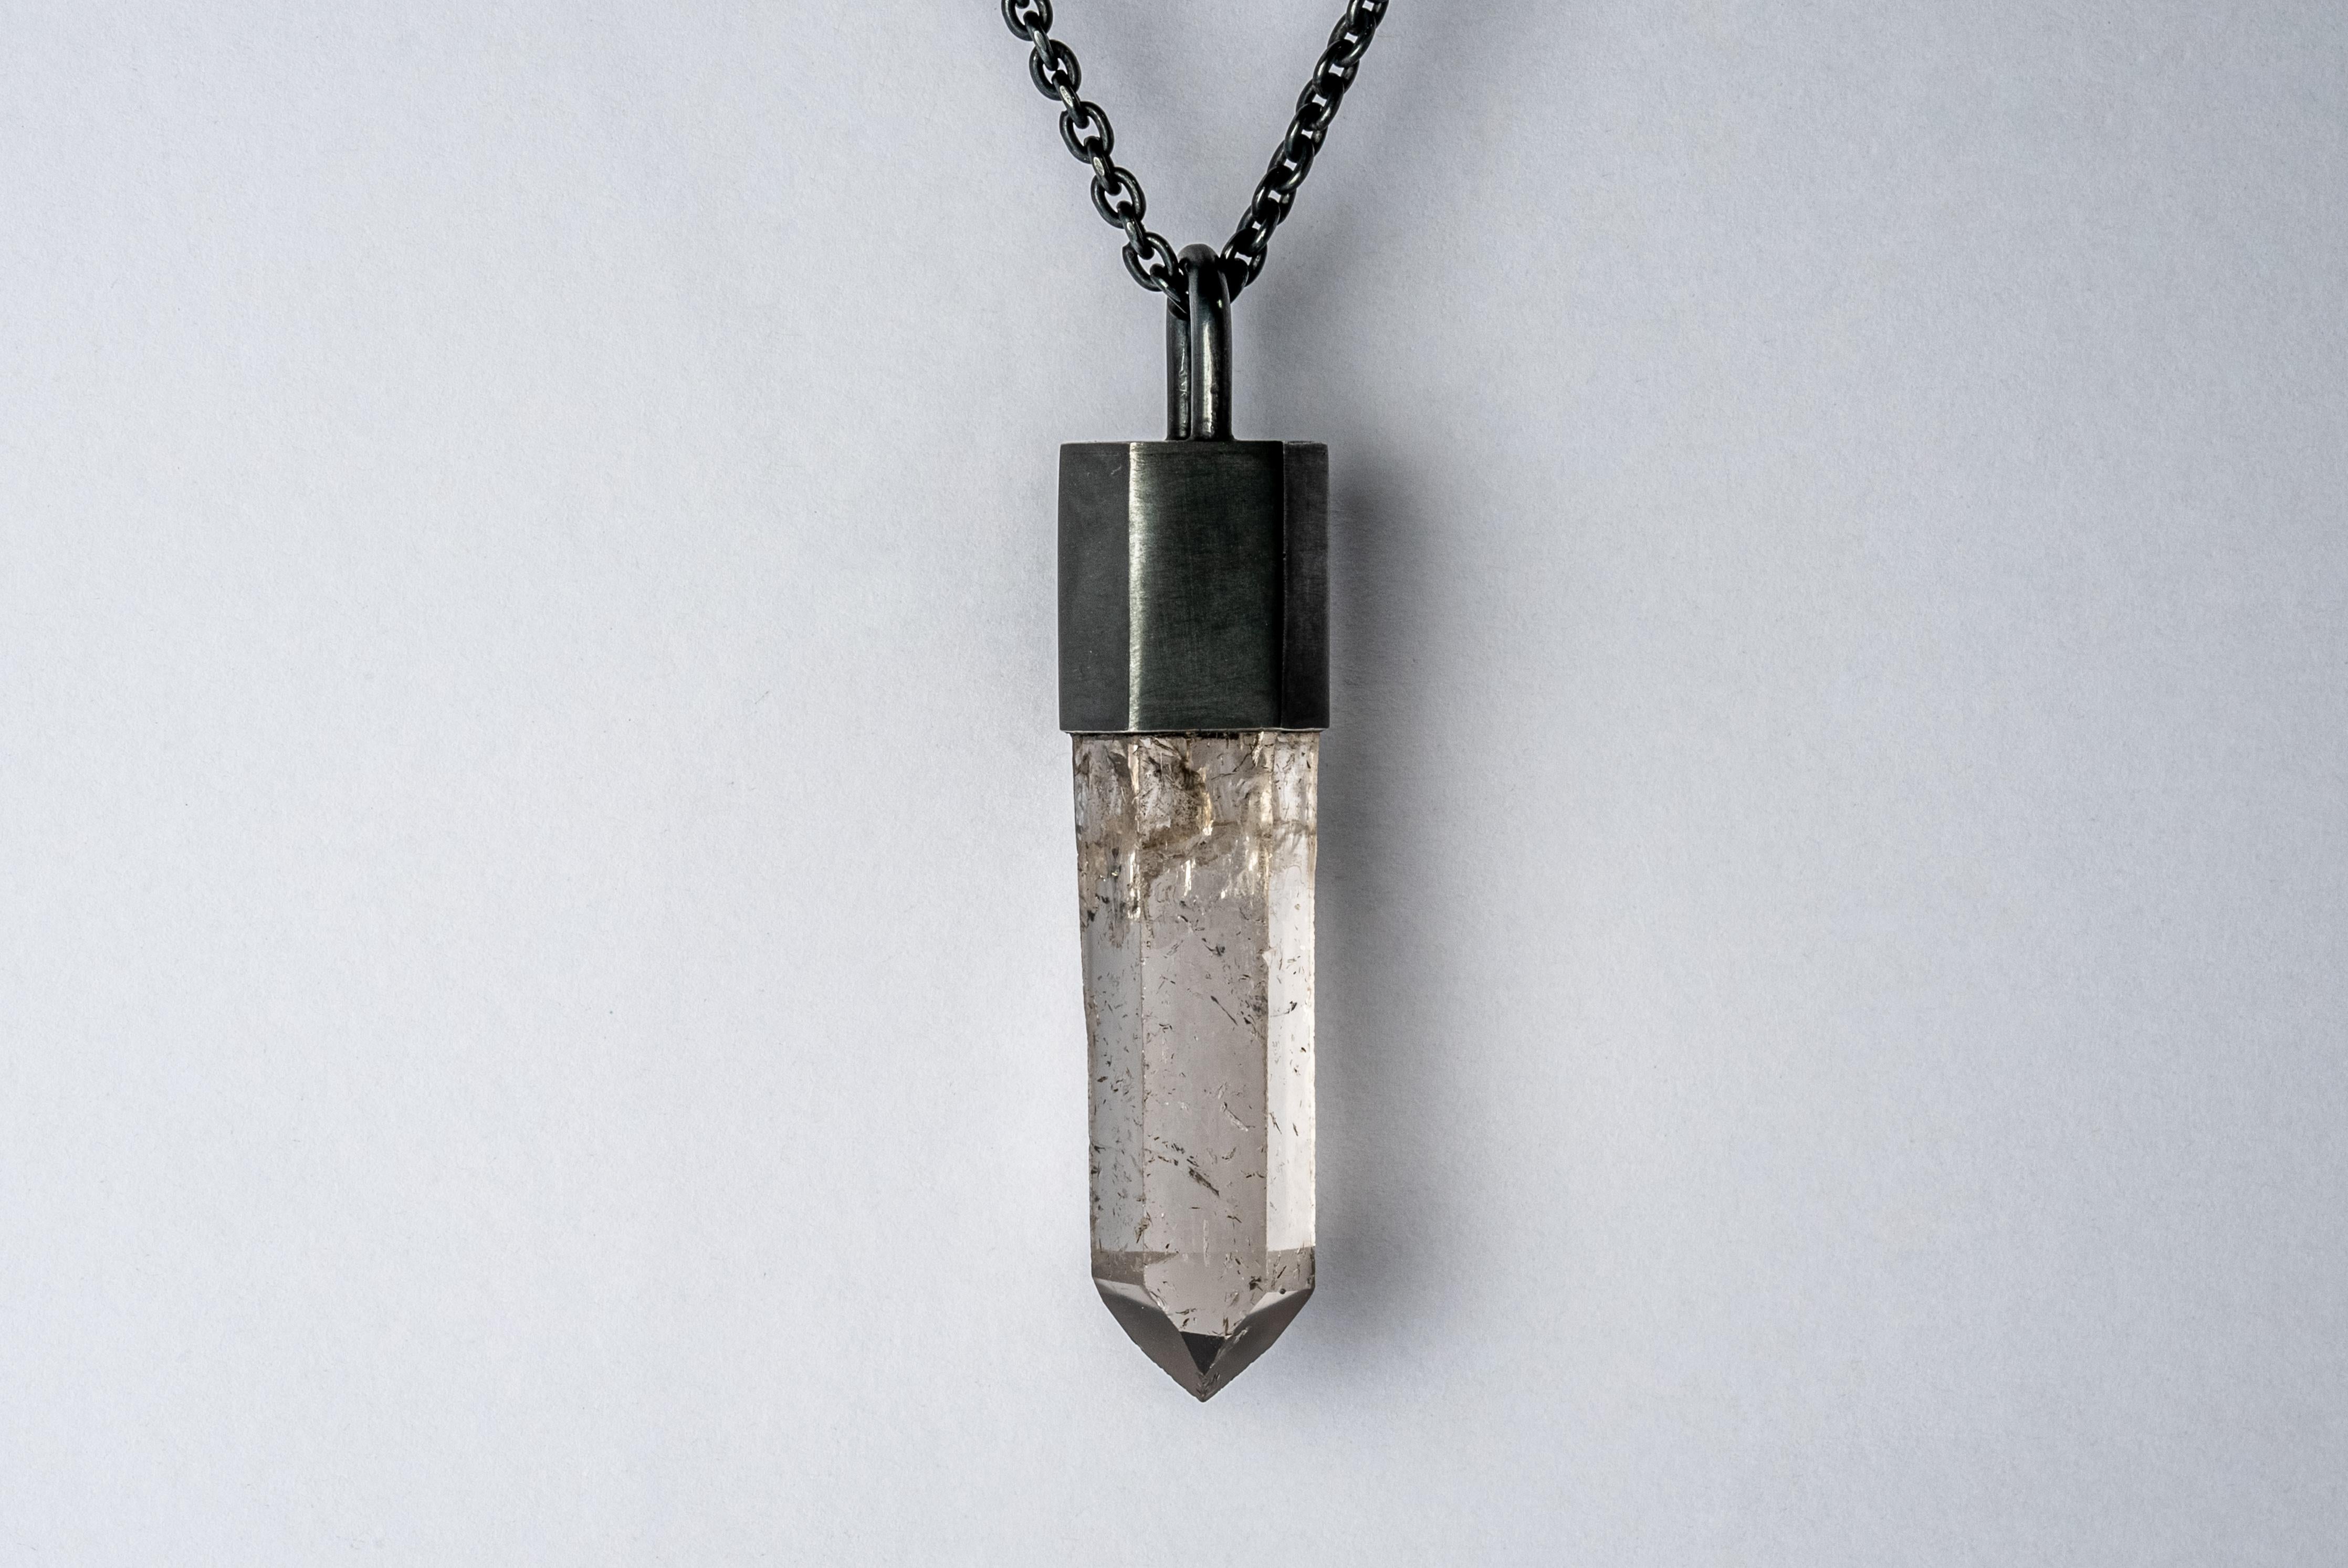 Pendant necklace in black sterling silver and a rough of smoky quartz. Black Sterling is a surface oxidation of sterling silver. This finish may fade over time, which can be considered an enhancement. Please note that Black Sterling tends to appear